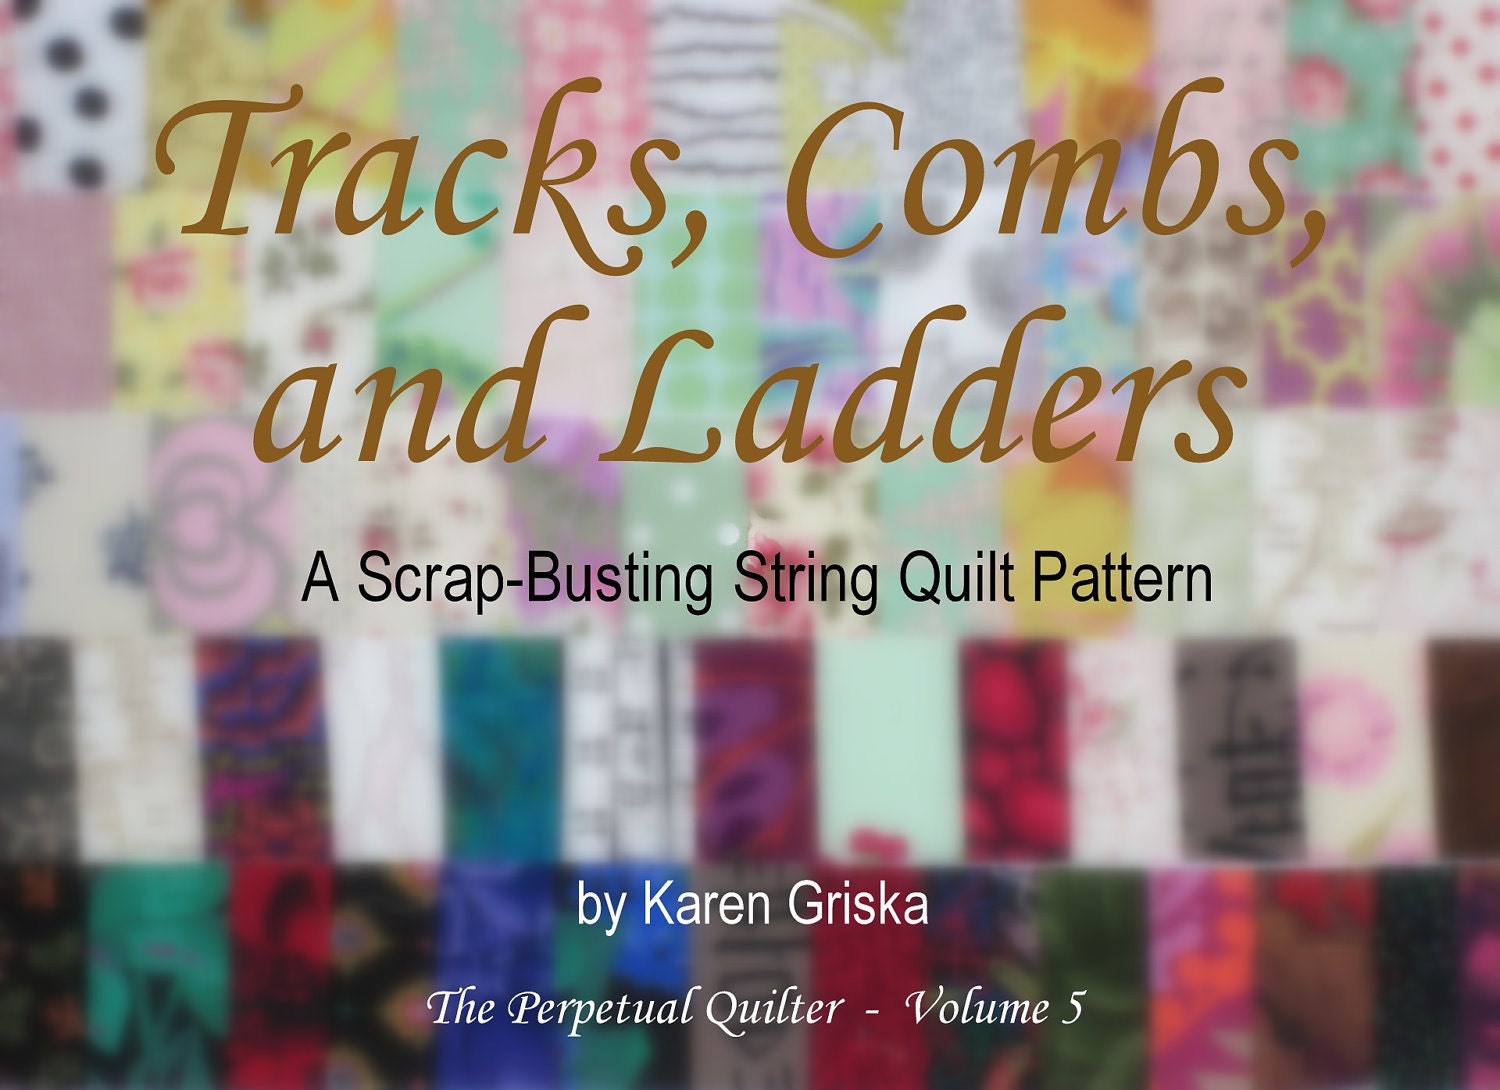 New String Quilt Pattern, pdf Tutorial, Upcycle, Recycle, Free Shipping, "Tracks, Combs and Ladders"